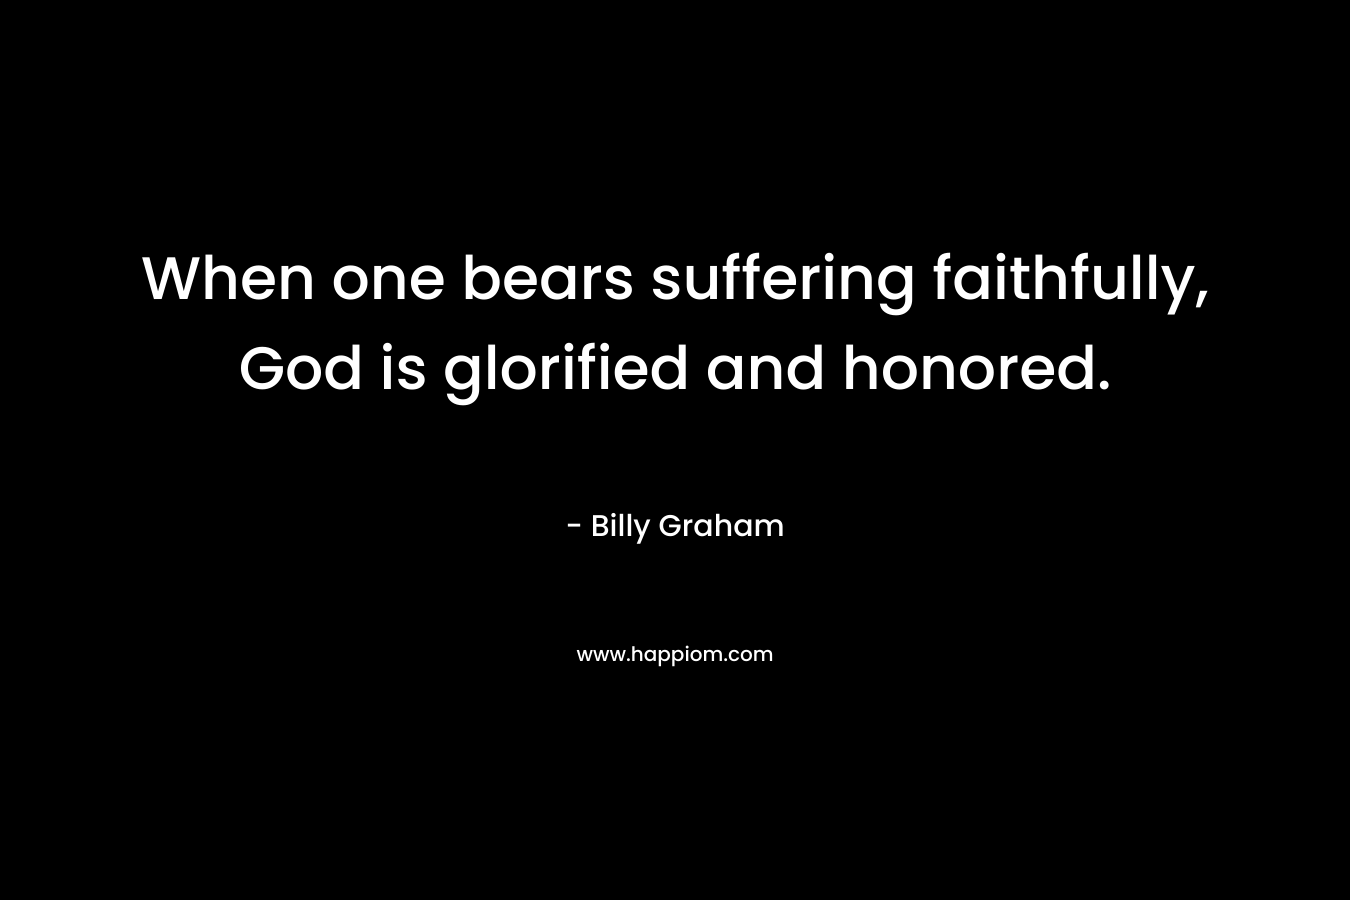 When one bears suffering faithfully, God is glorified and honored. – Billy Graham